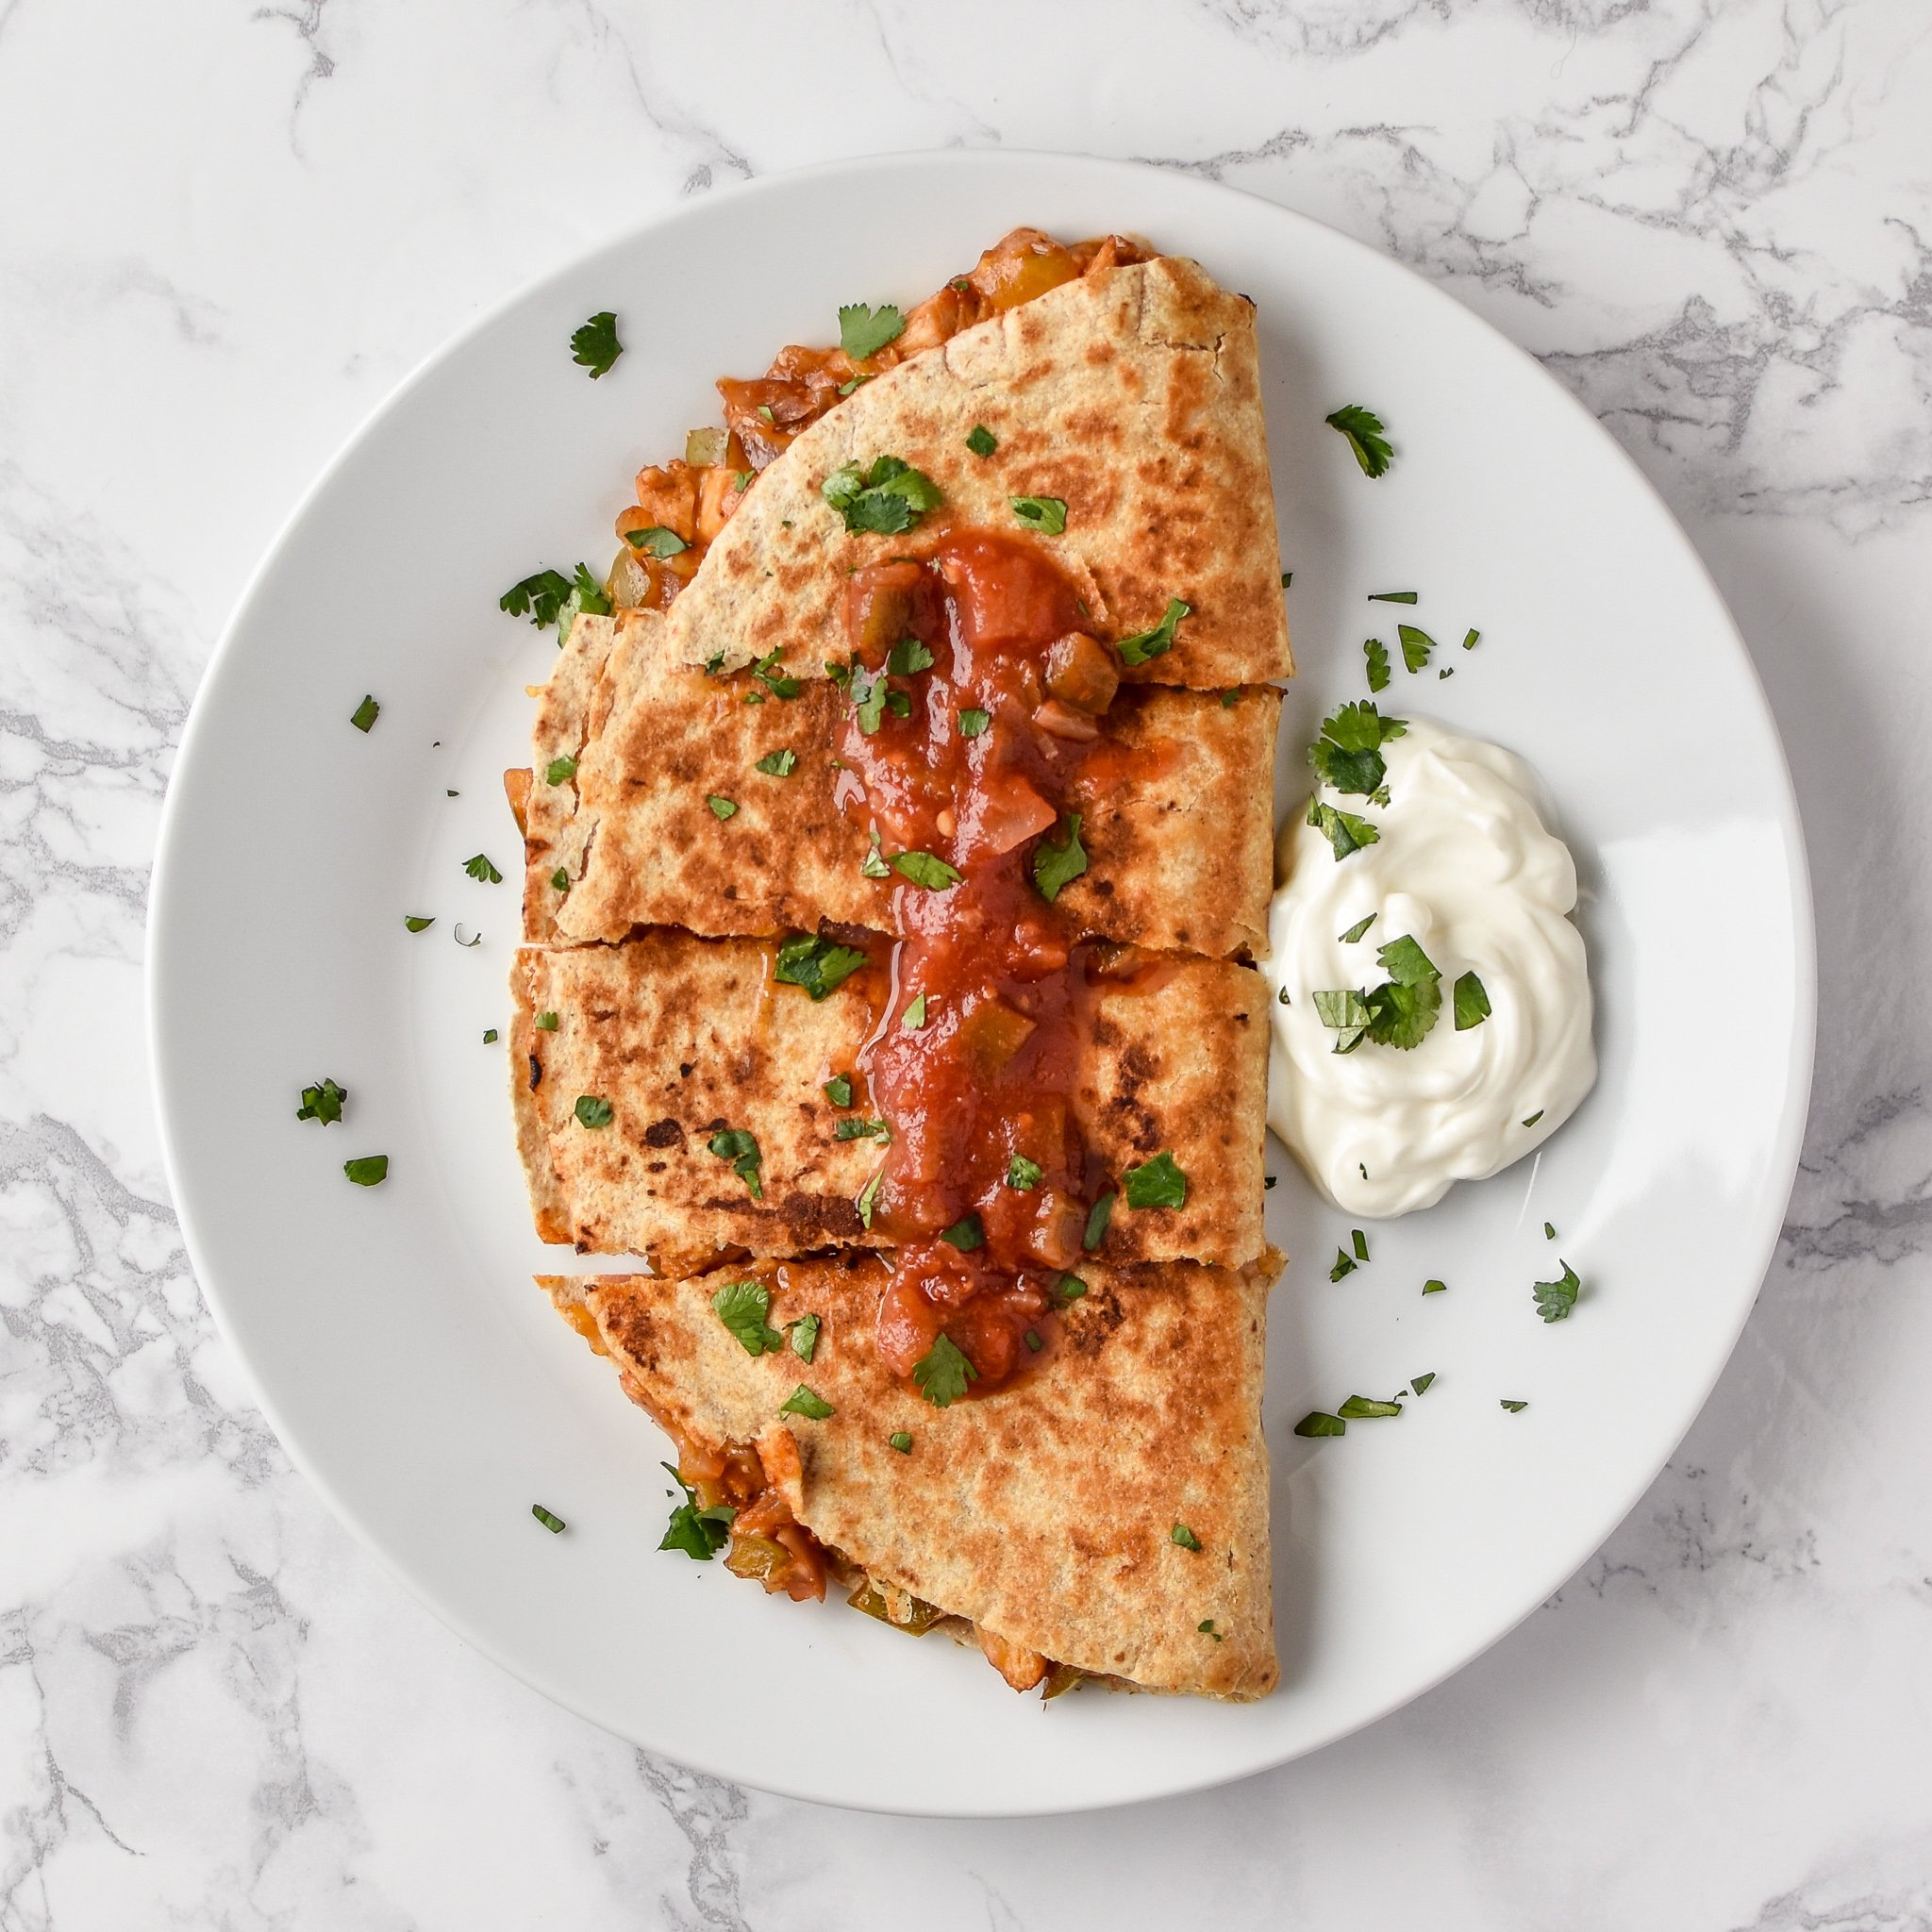 Quick BBQ Chicken Quesadillas (Make-Ahead Filling Recipe) - Delicious BBQ chicken quesadillas made in 10 minutes with pre-made filling! - ProjectMealPlan.com